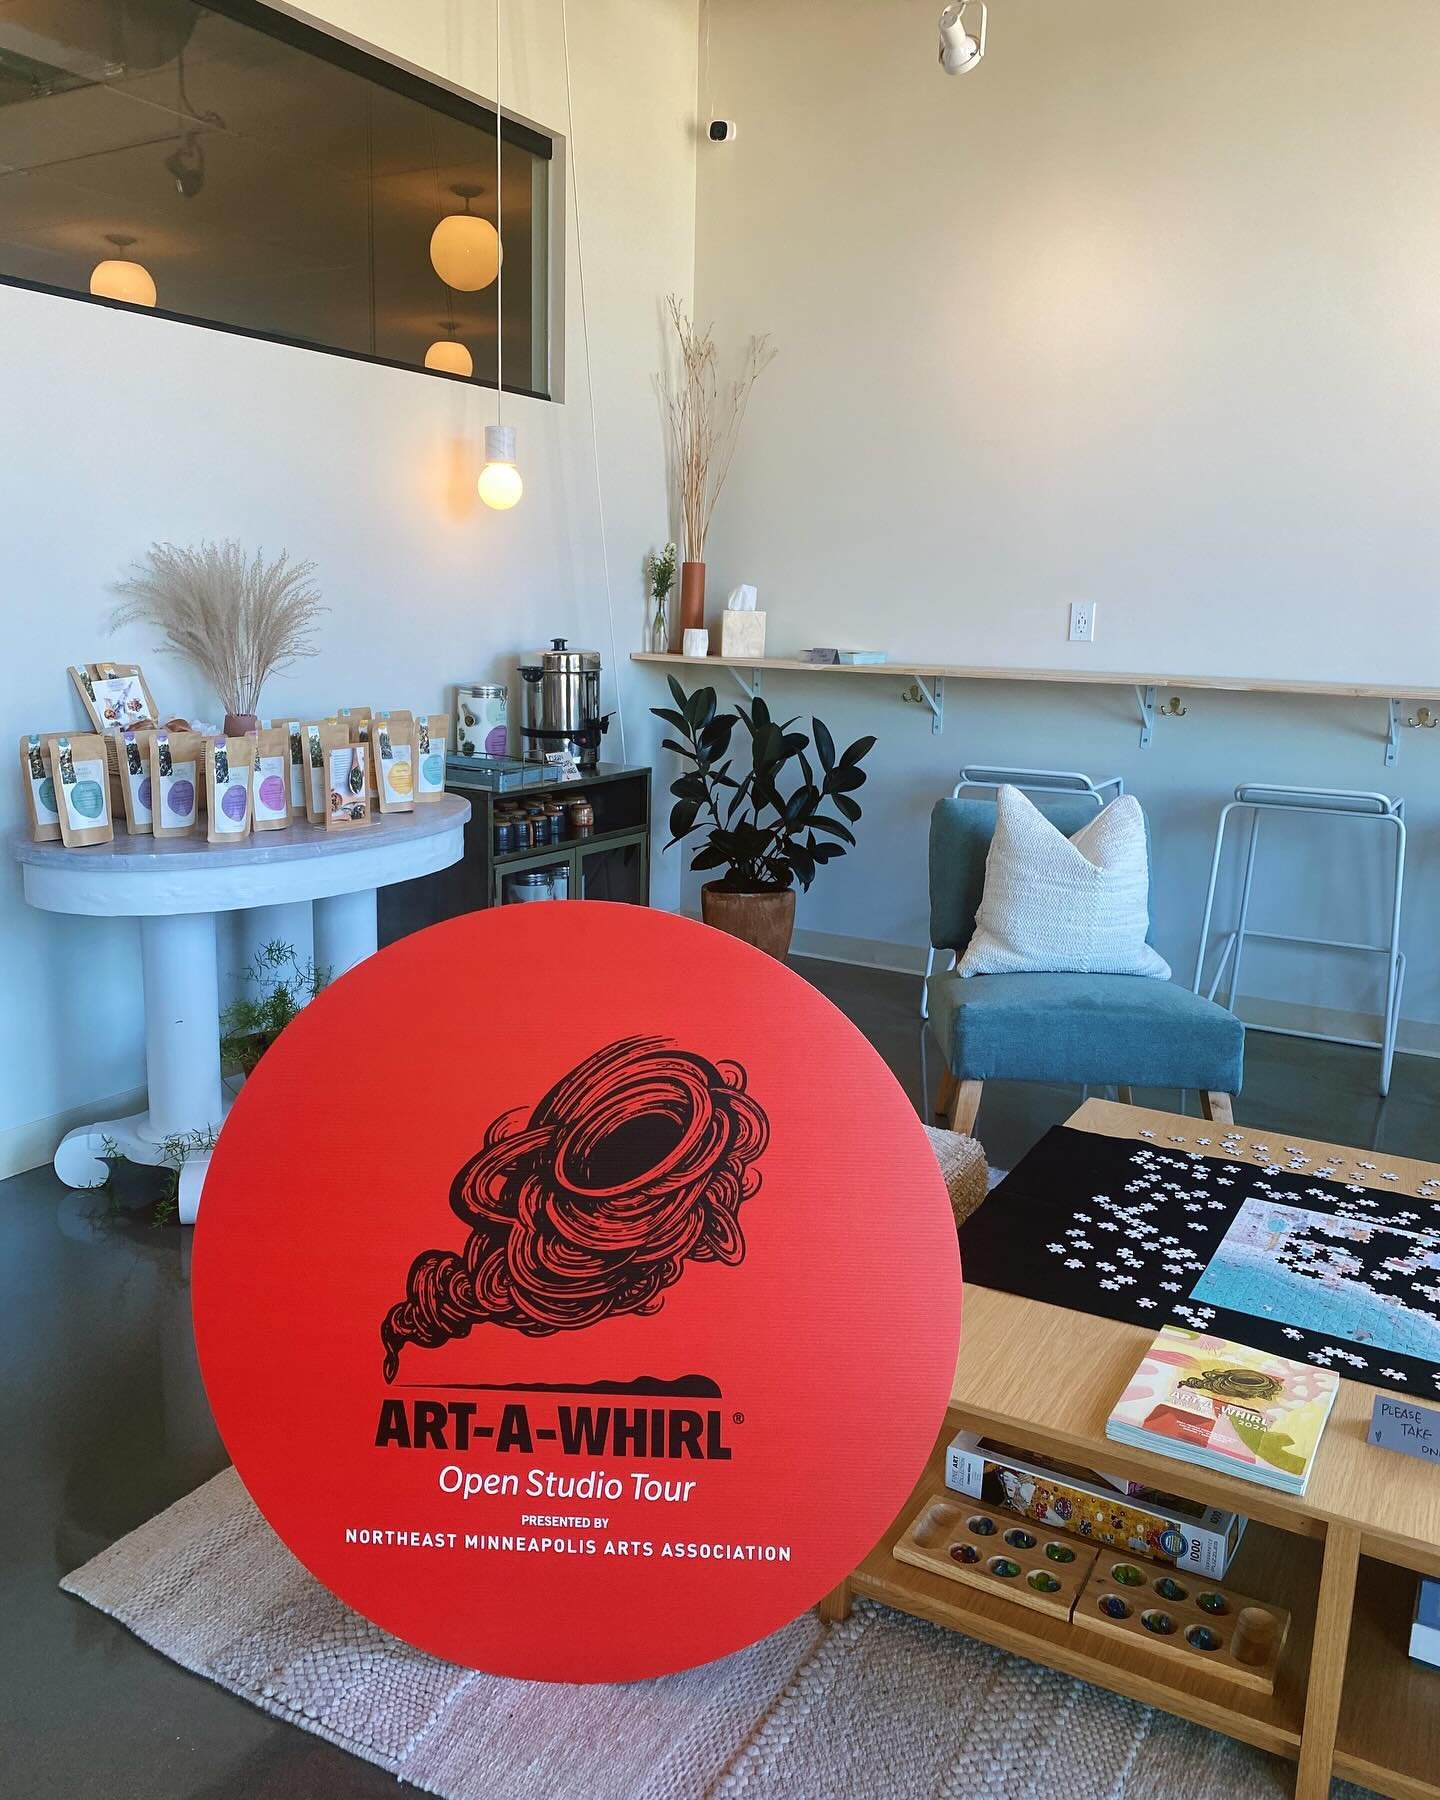 We cant wait for Art-A-Whirl!! 🌀😆 We got our big red dot 🔴 which indicates where you can find @nemaamn partners like local businesses, artists, and galleries who are open for Art-A-Whirl weekend! 

We have Art-A-Whirl 2024 directories at our studi